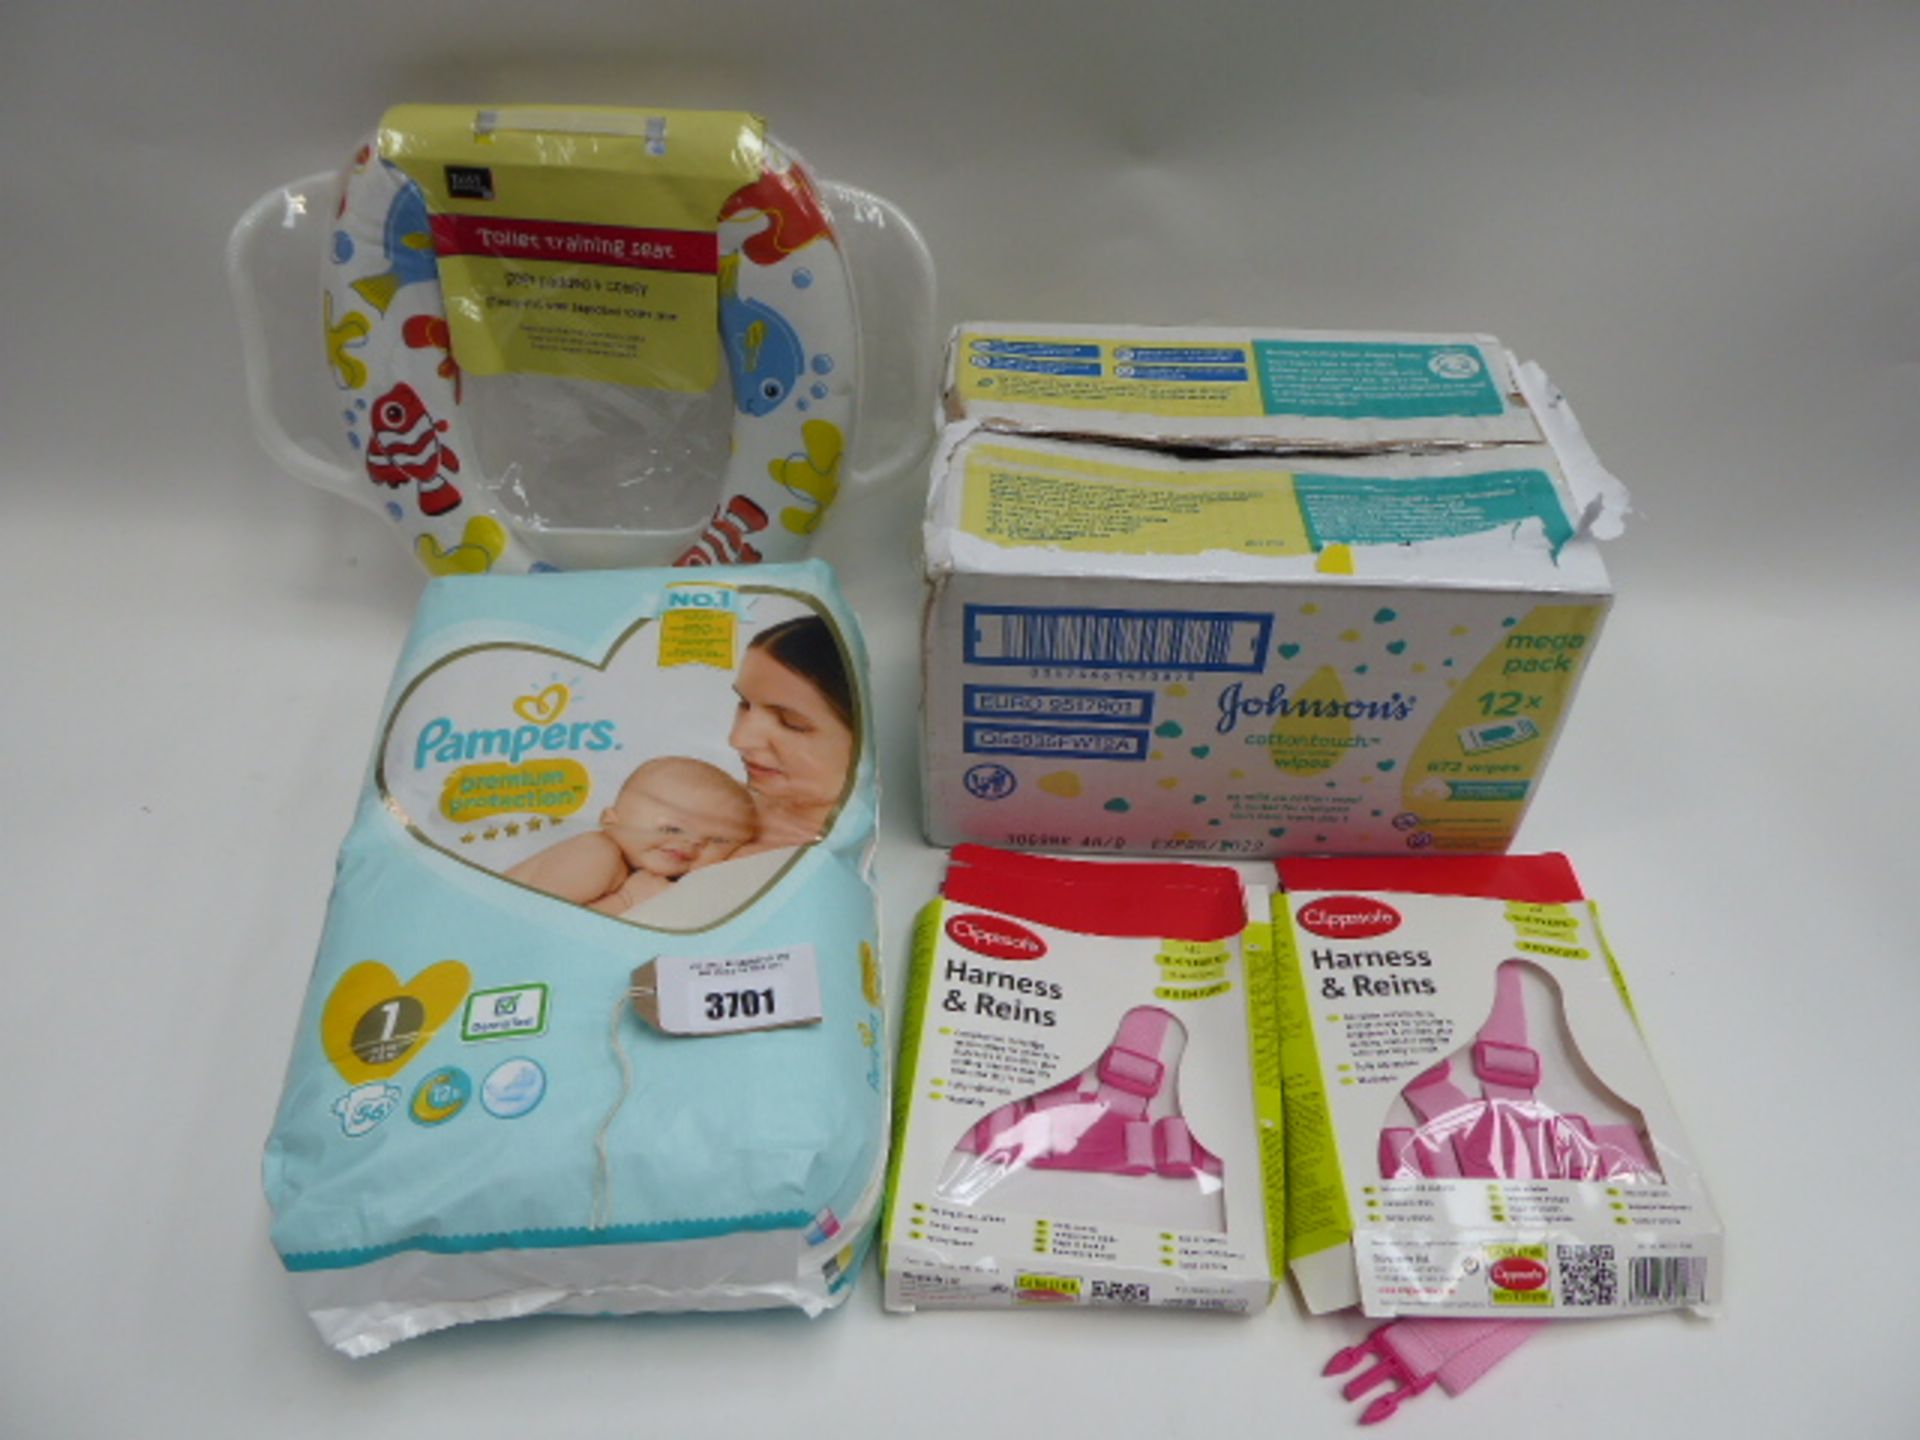 Box of 10 packs of Johnson's cottontouch wipes, Pampers 1 nappies, toilet training seat and 2x